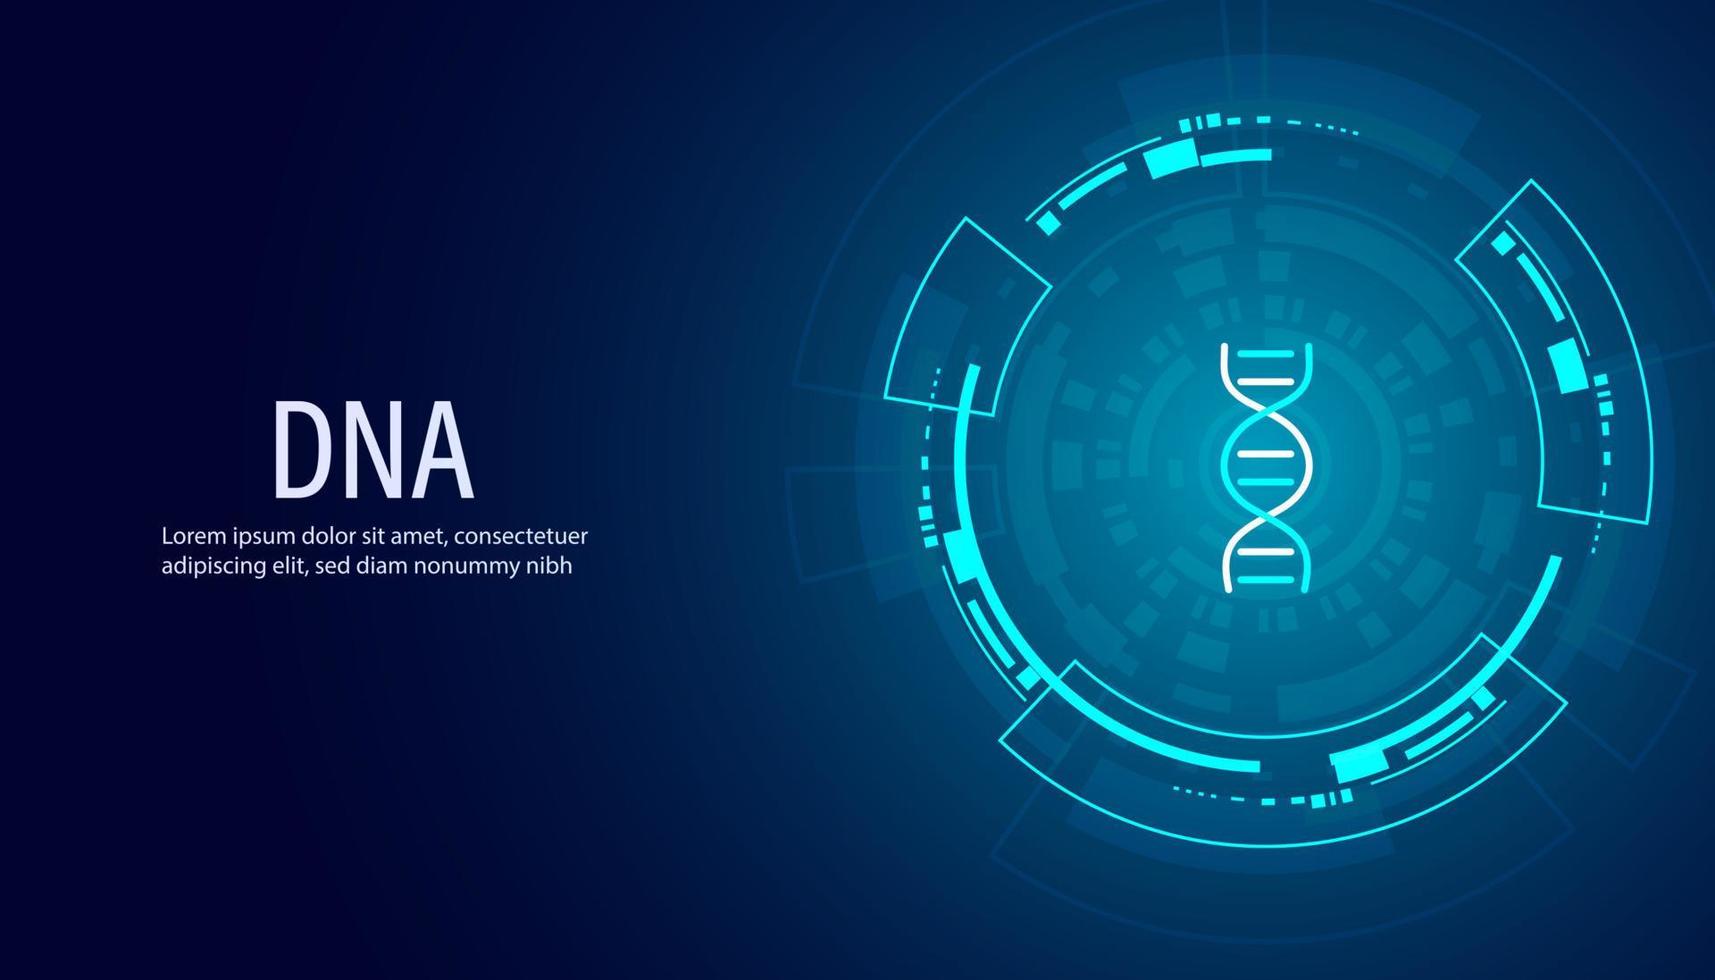 Abstract DNA or ANA flat icons and digital circles technology modern gene editing genetic engineering On a blue background vector